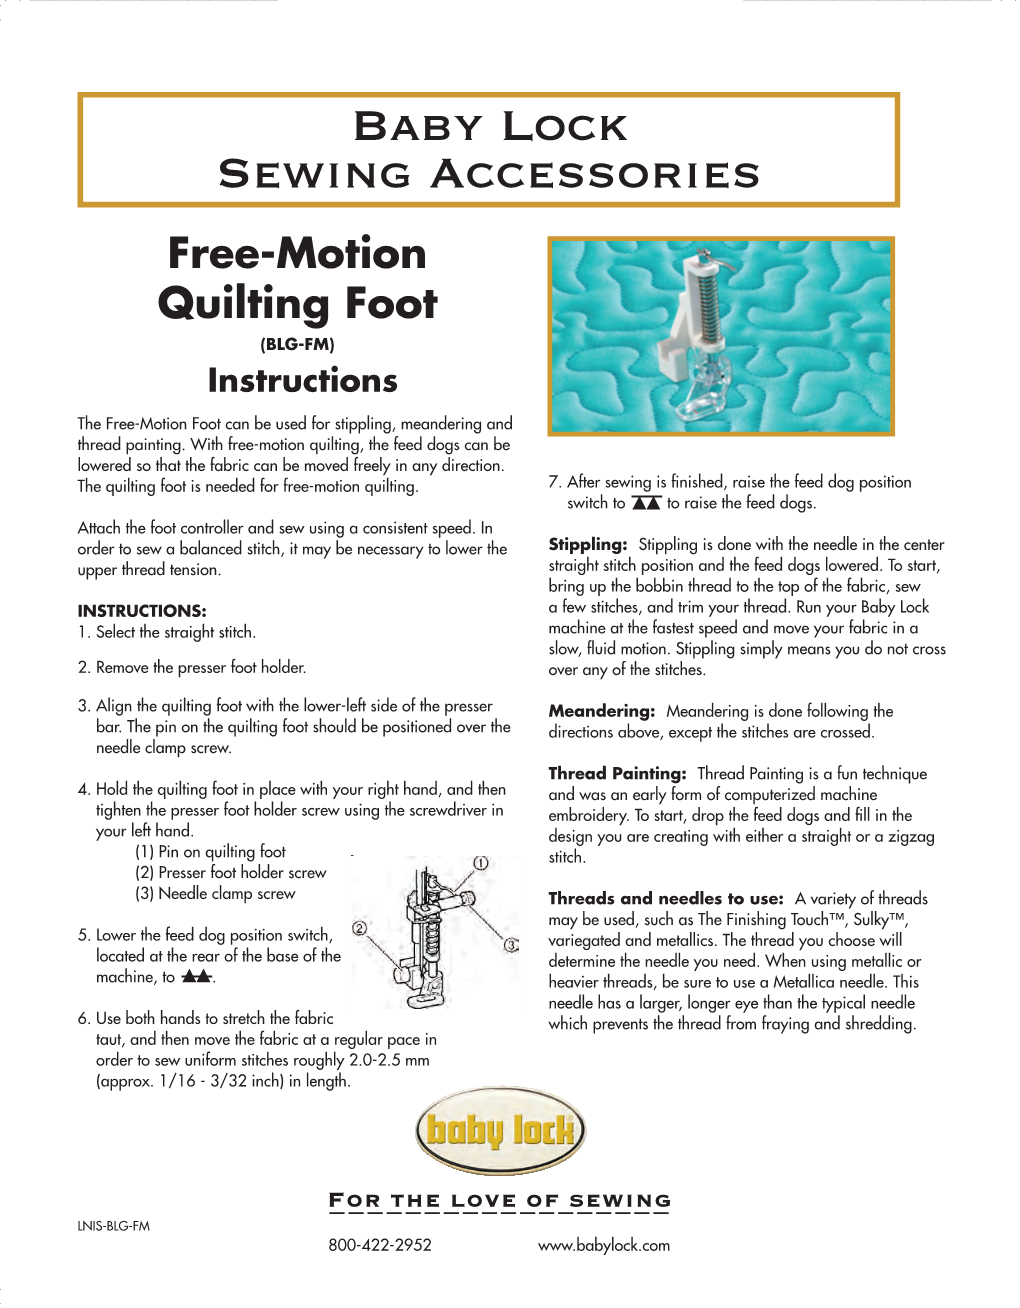 Baby Lock Sewing Accessories Free-Motion Quilting Foot (BLG-FM) Instructions